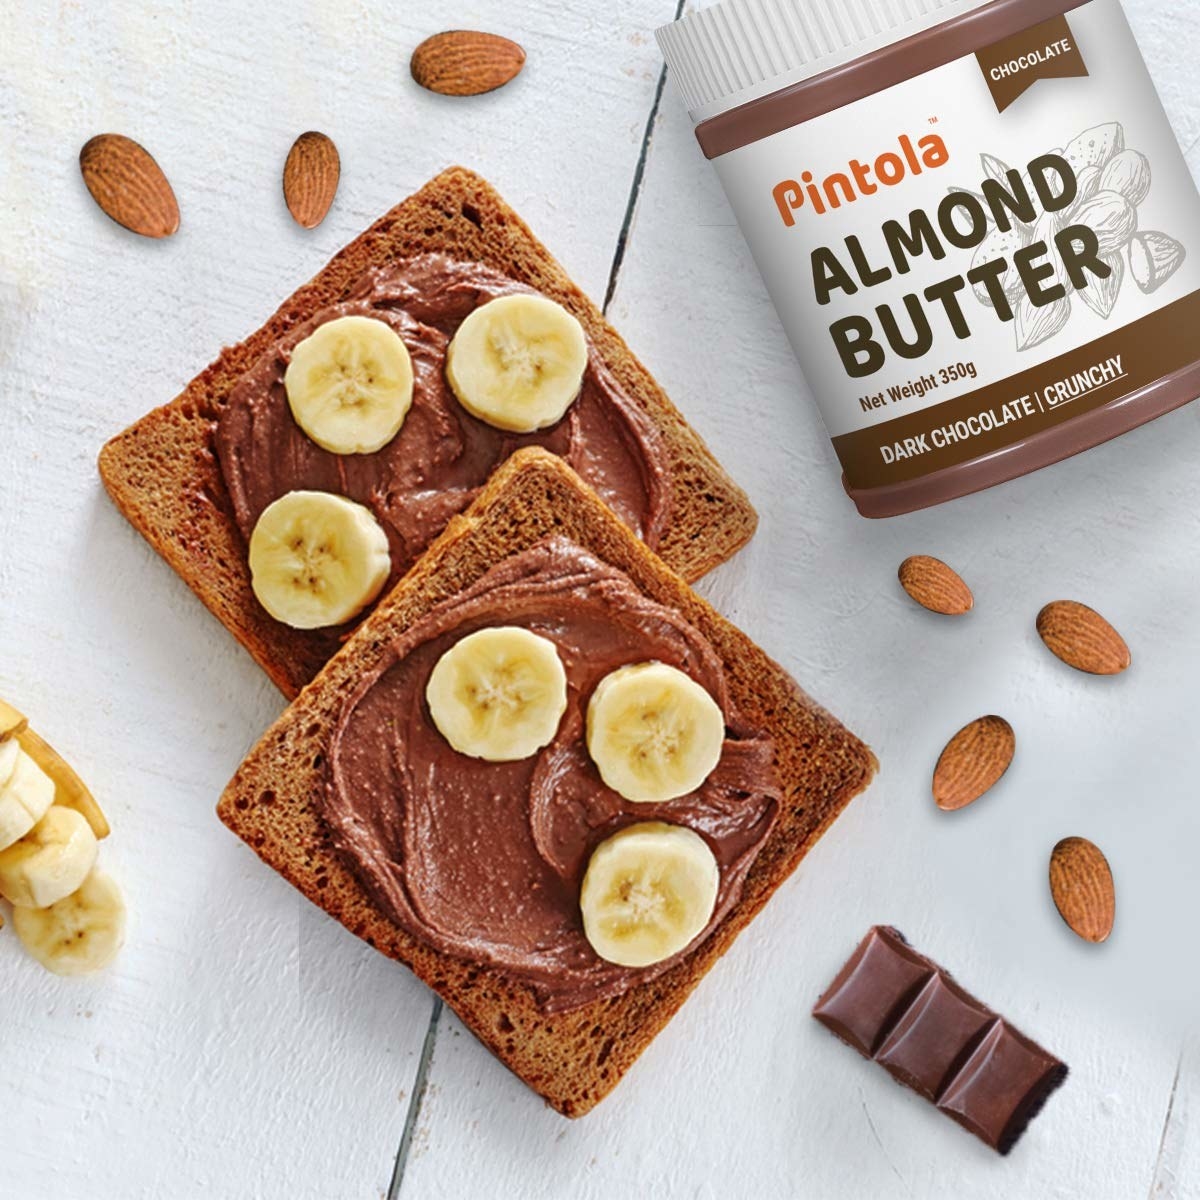 The almond butter slathered on toast with some banana slices